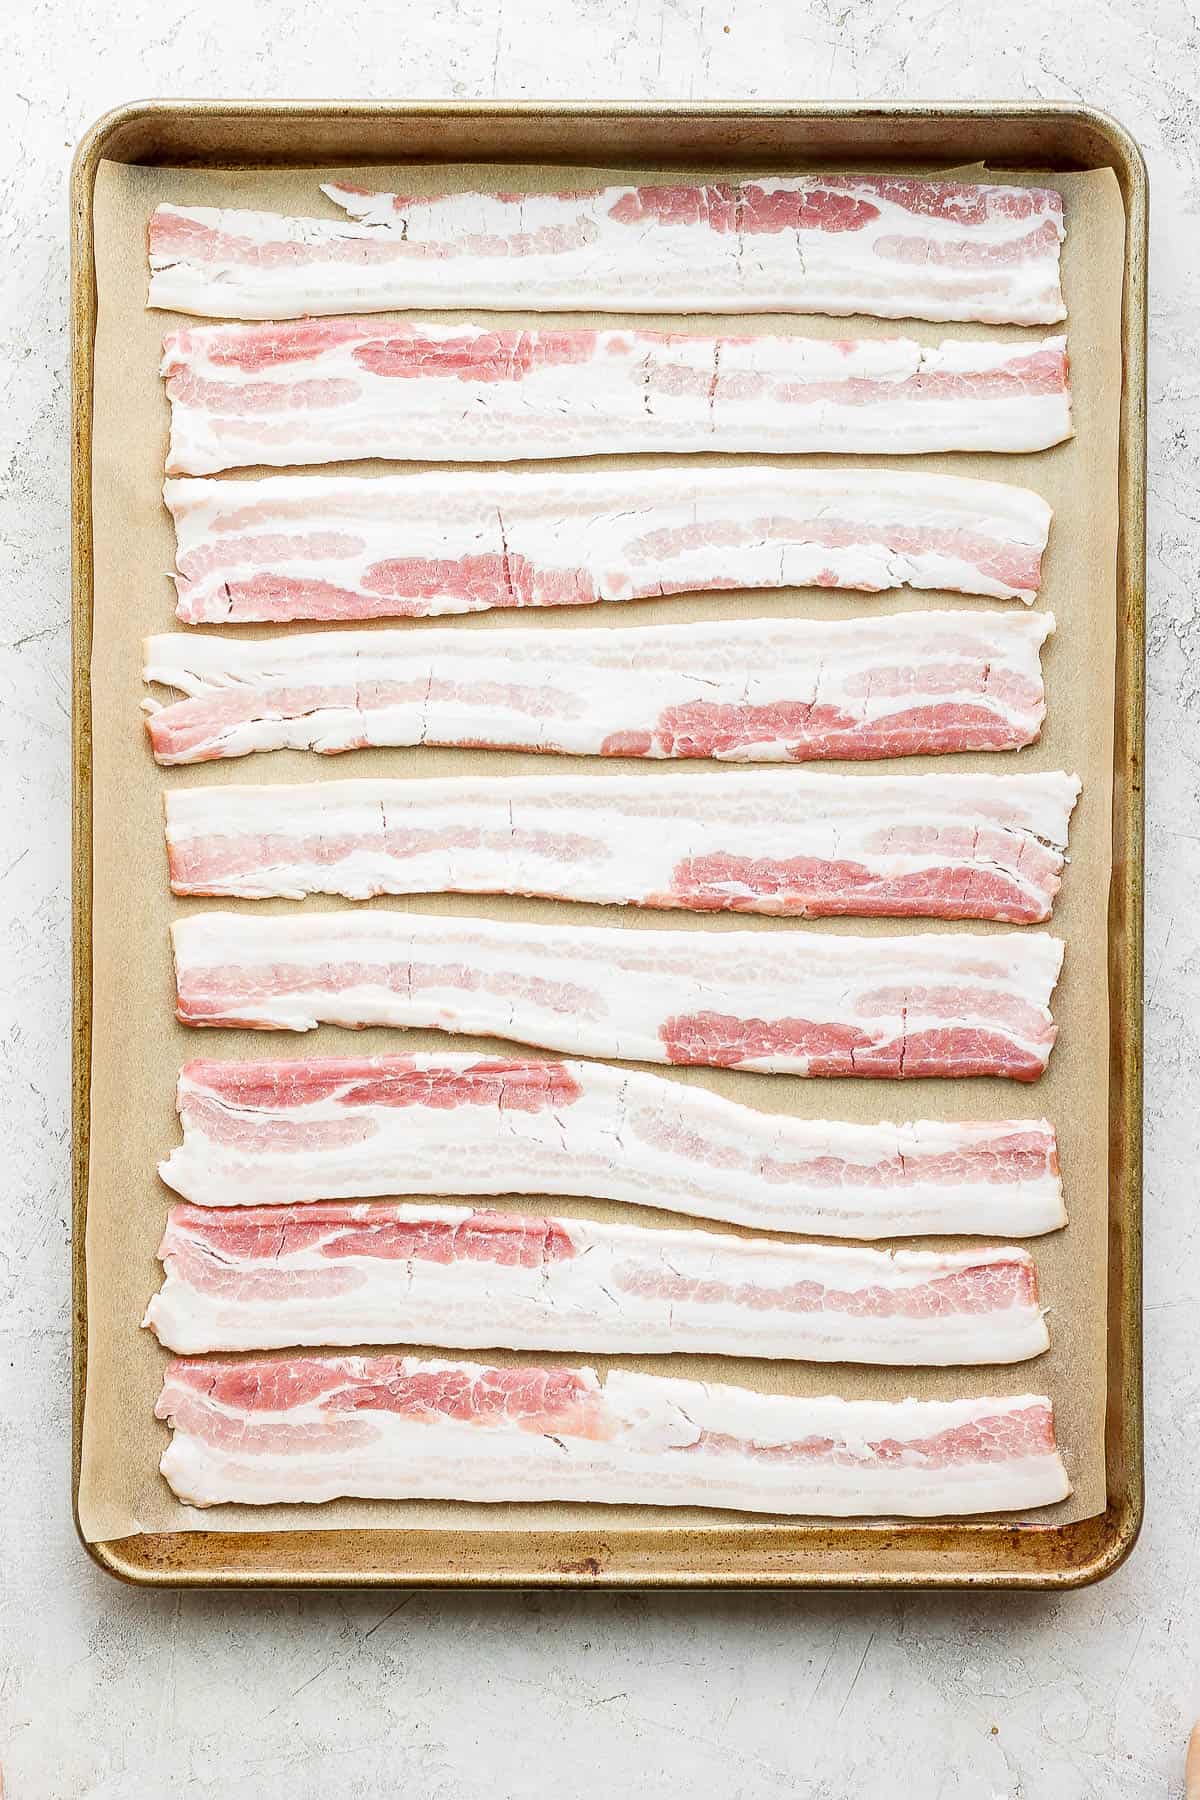 Uncooked bacon on a parchment-lined baking sheet.